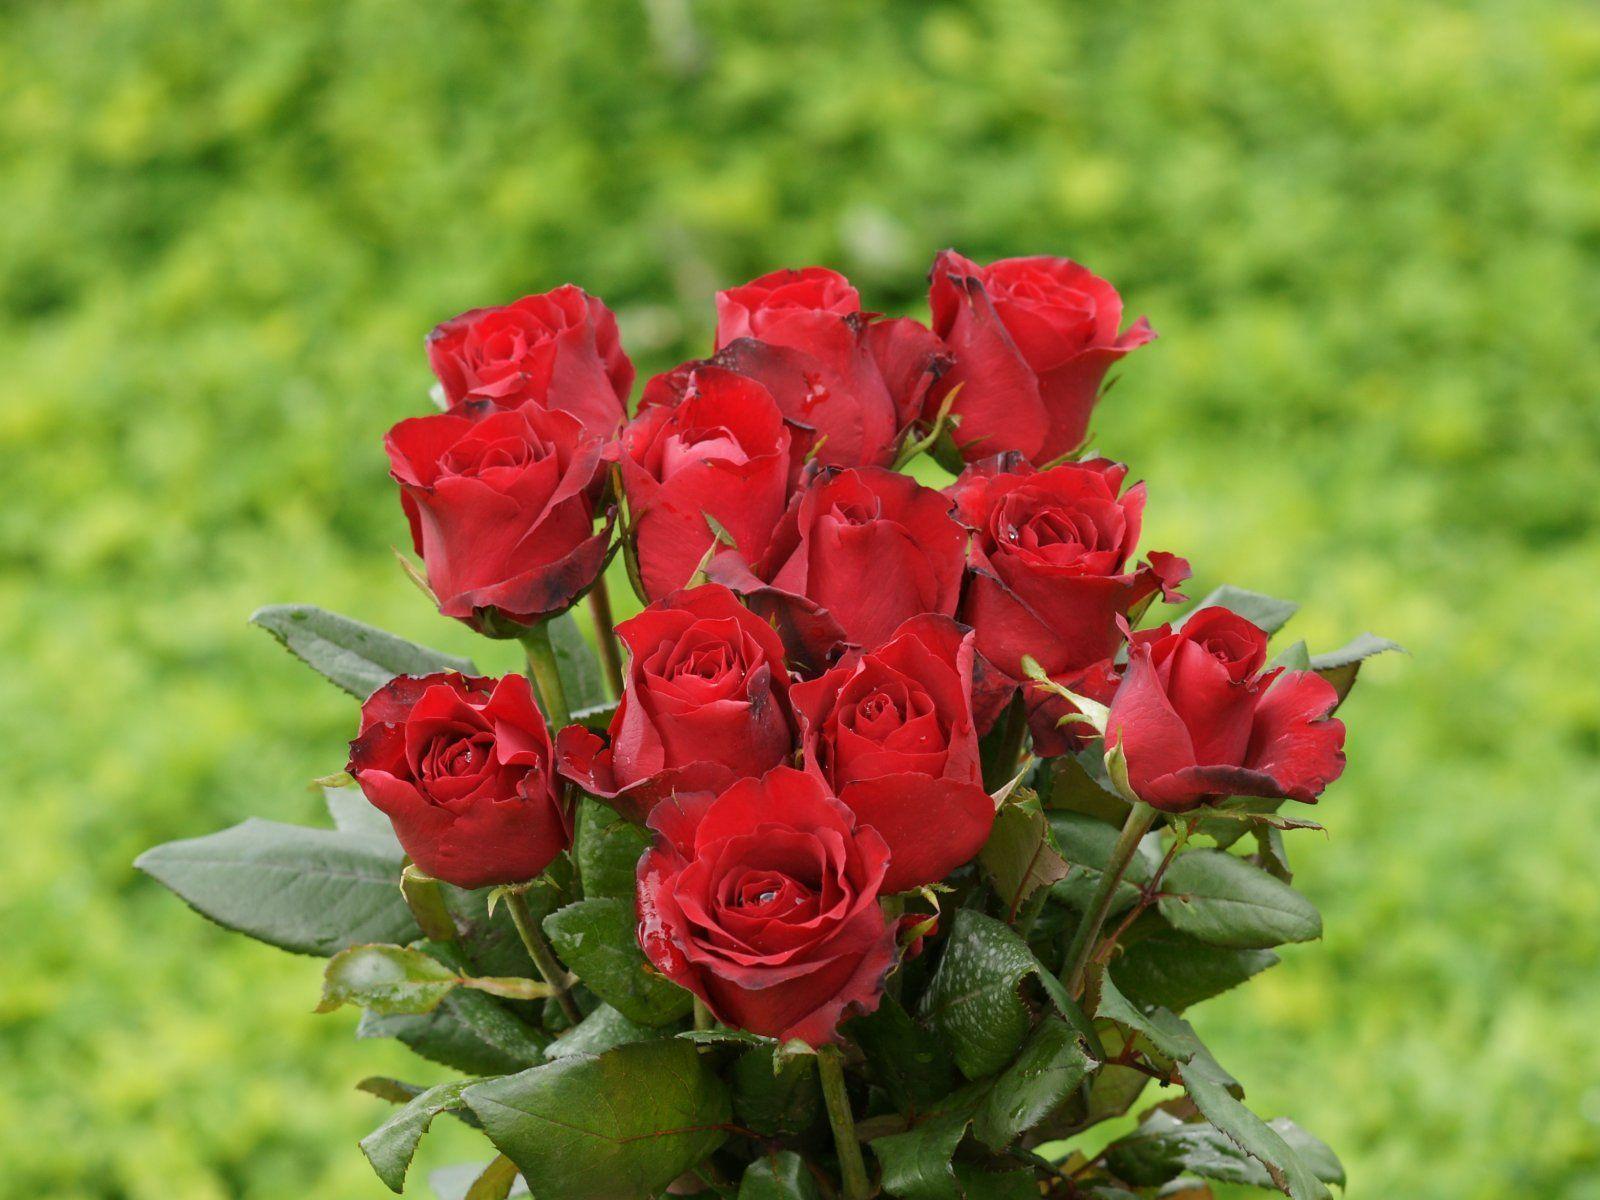 miscopono: beautiful rose, red rose, flowers, red rose wallpaper